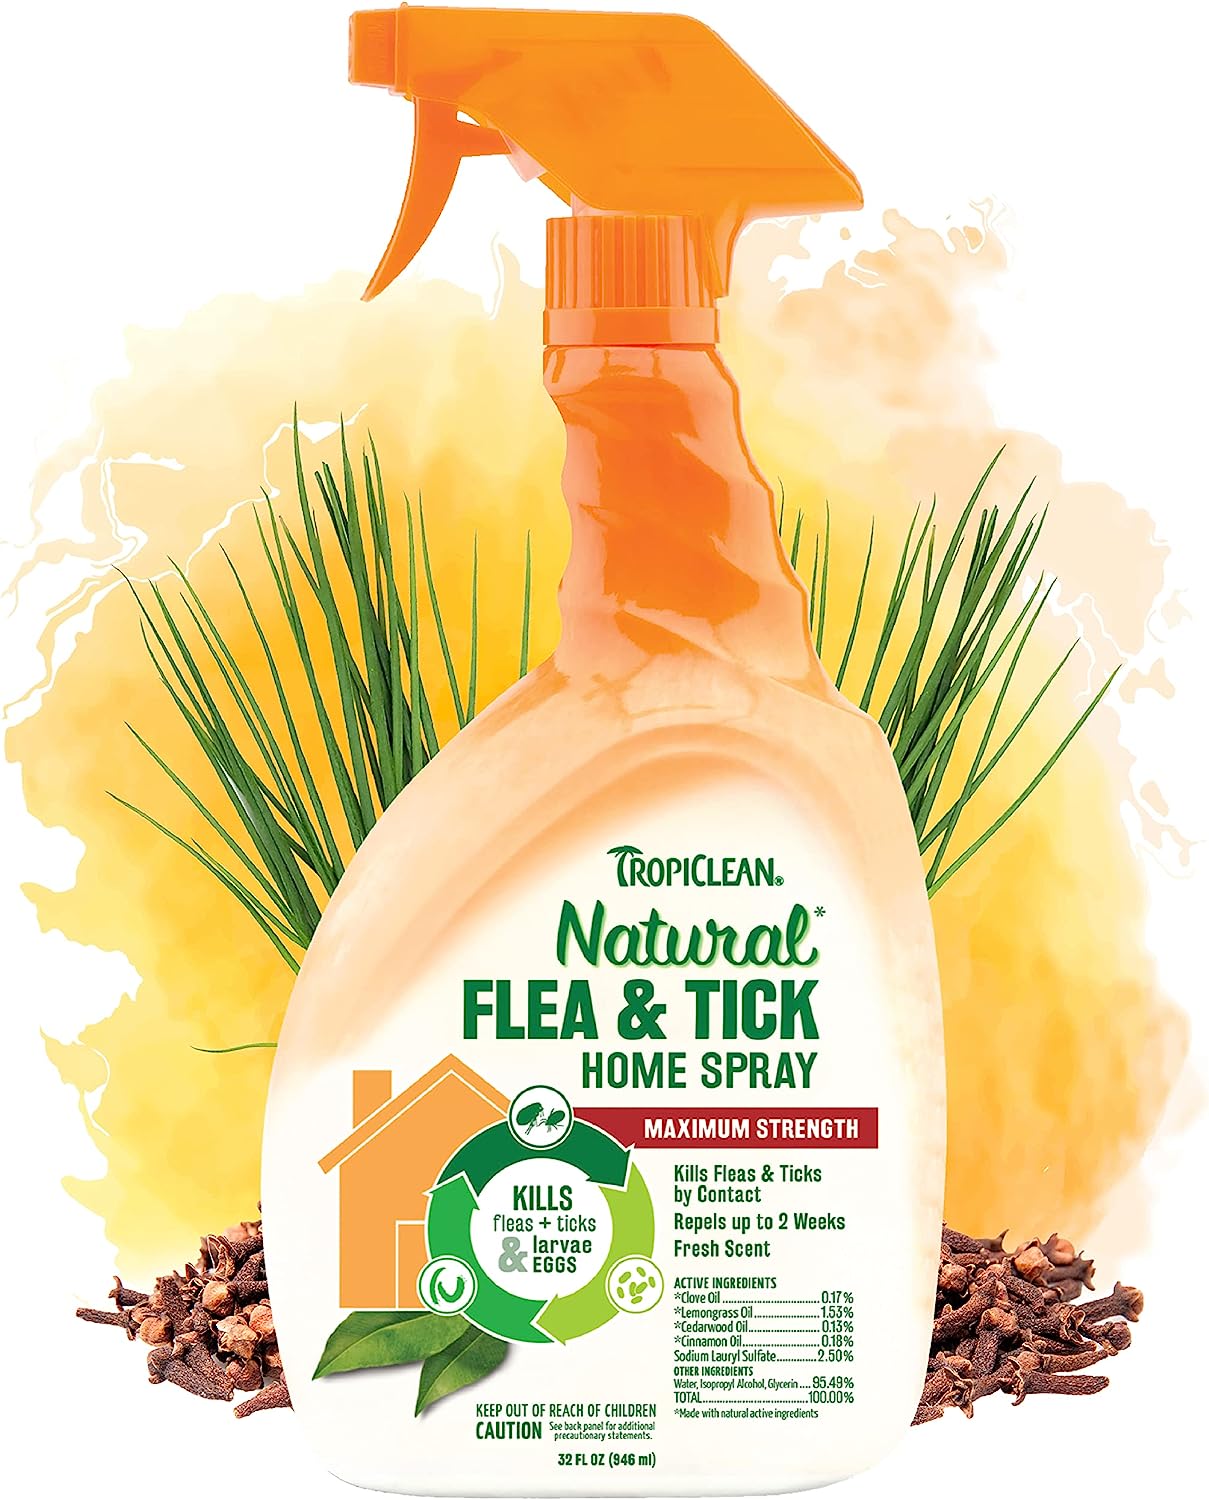 TropiClean Natural Flea and Tick Spray for Home | [...]